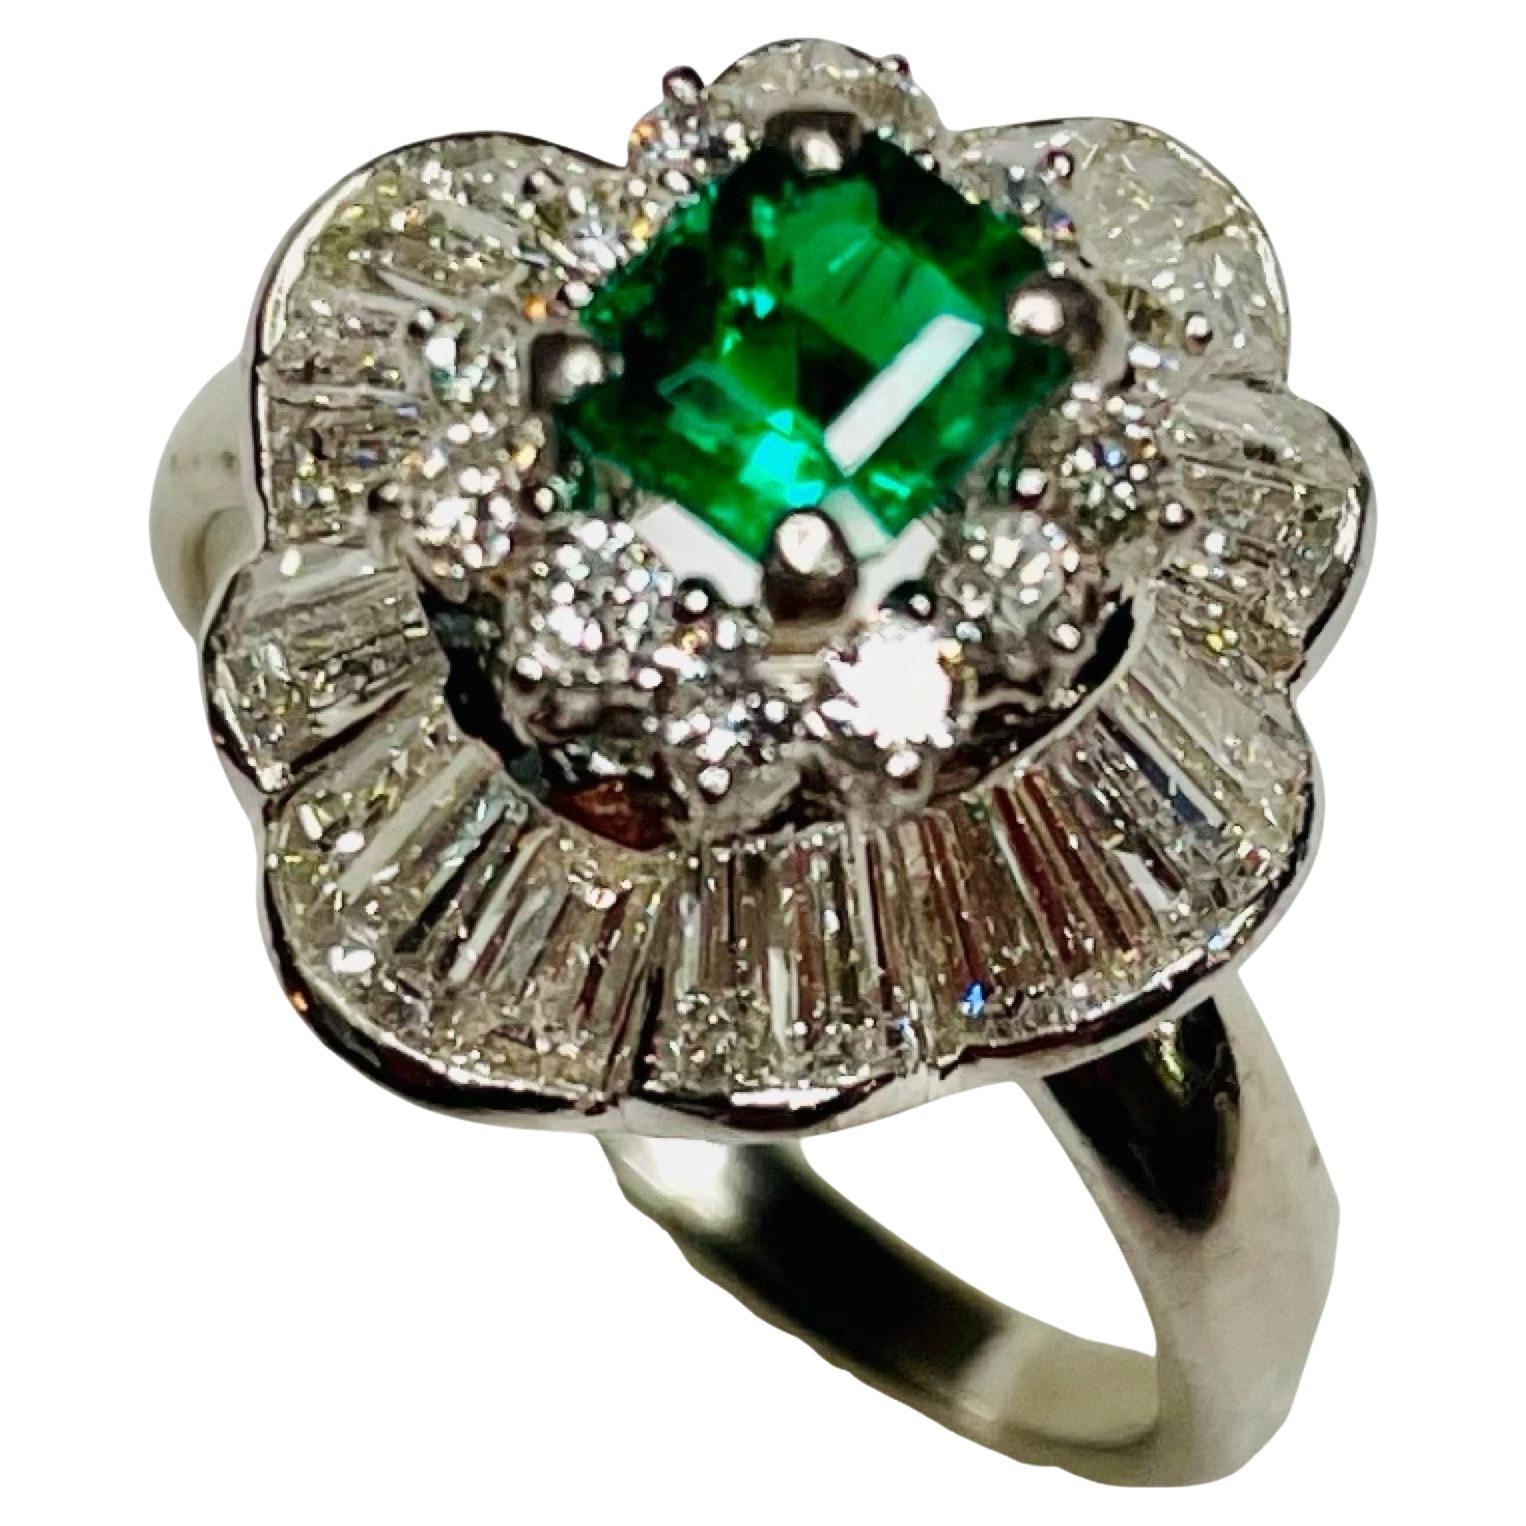 Bogo Platinum Diamond and Emerald Ring. This ring has 0.50 carat emerald cut emerald, set in four prongs in the center. This natural emerald is only oiled. It is VS clarity. There are 24 baguettes cut diamonds channel set in a wave pattern. There